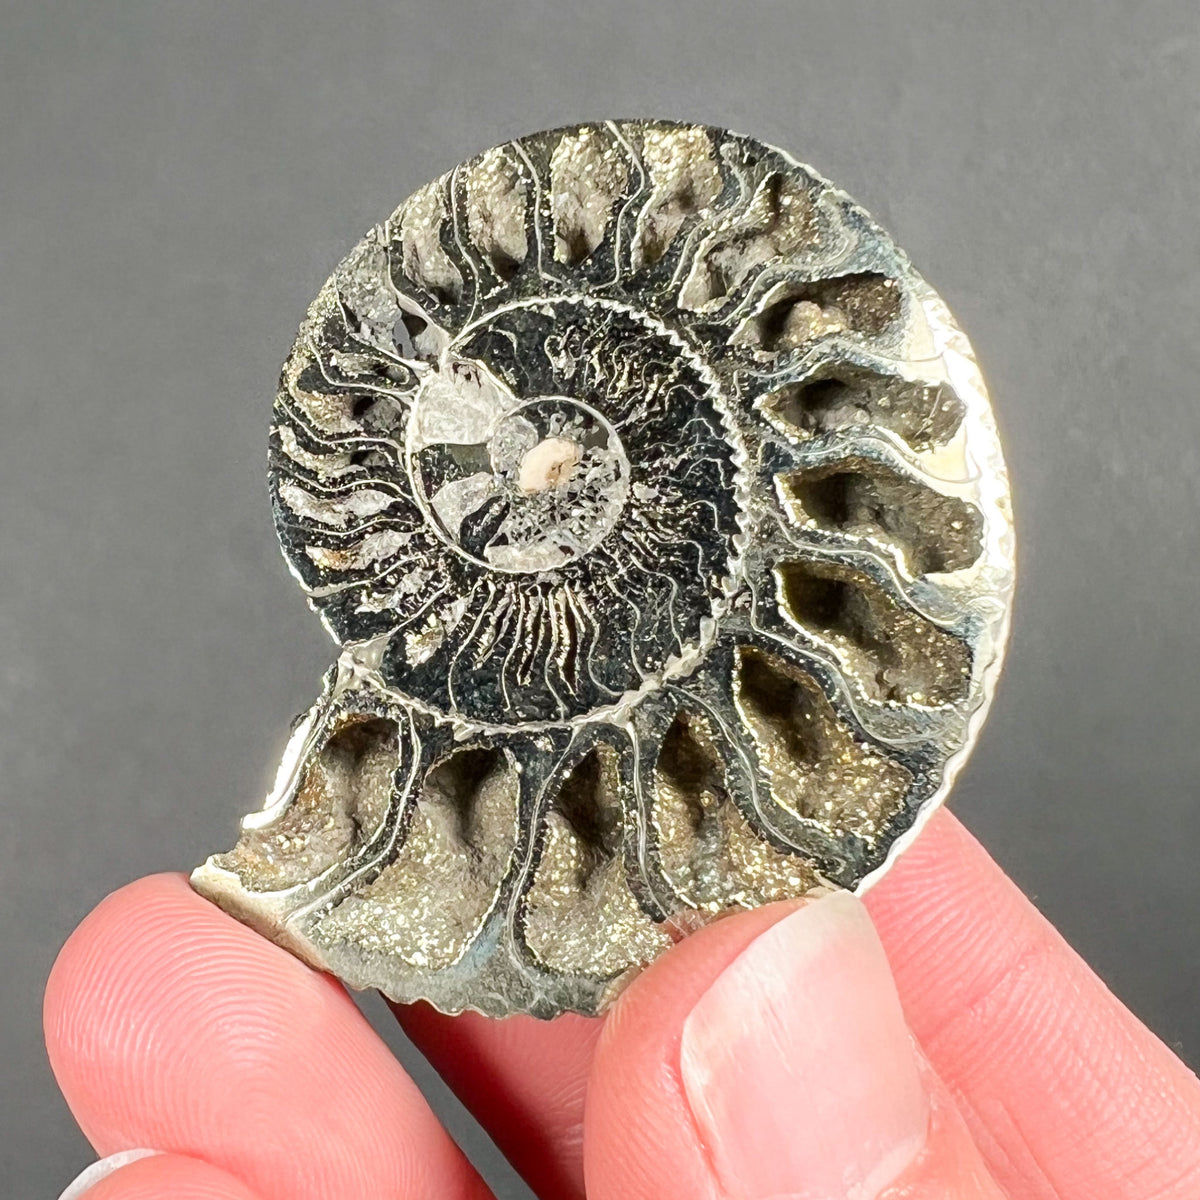 Fossil Ammonite with Pyrite Coating